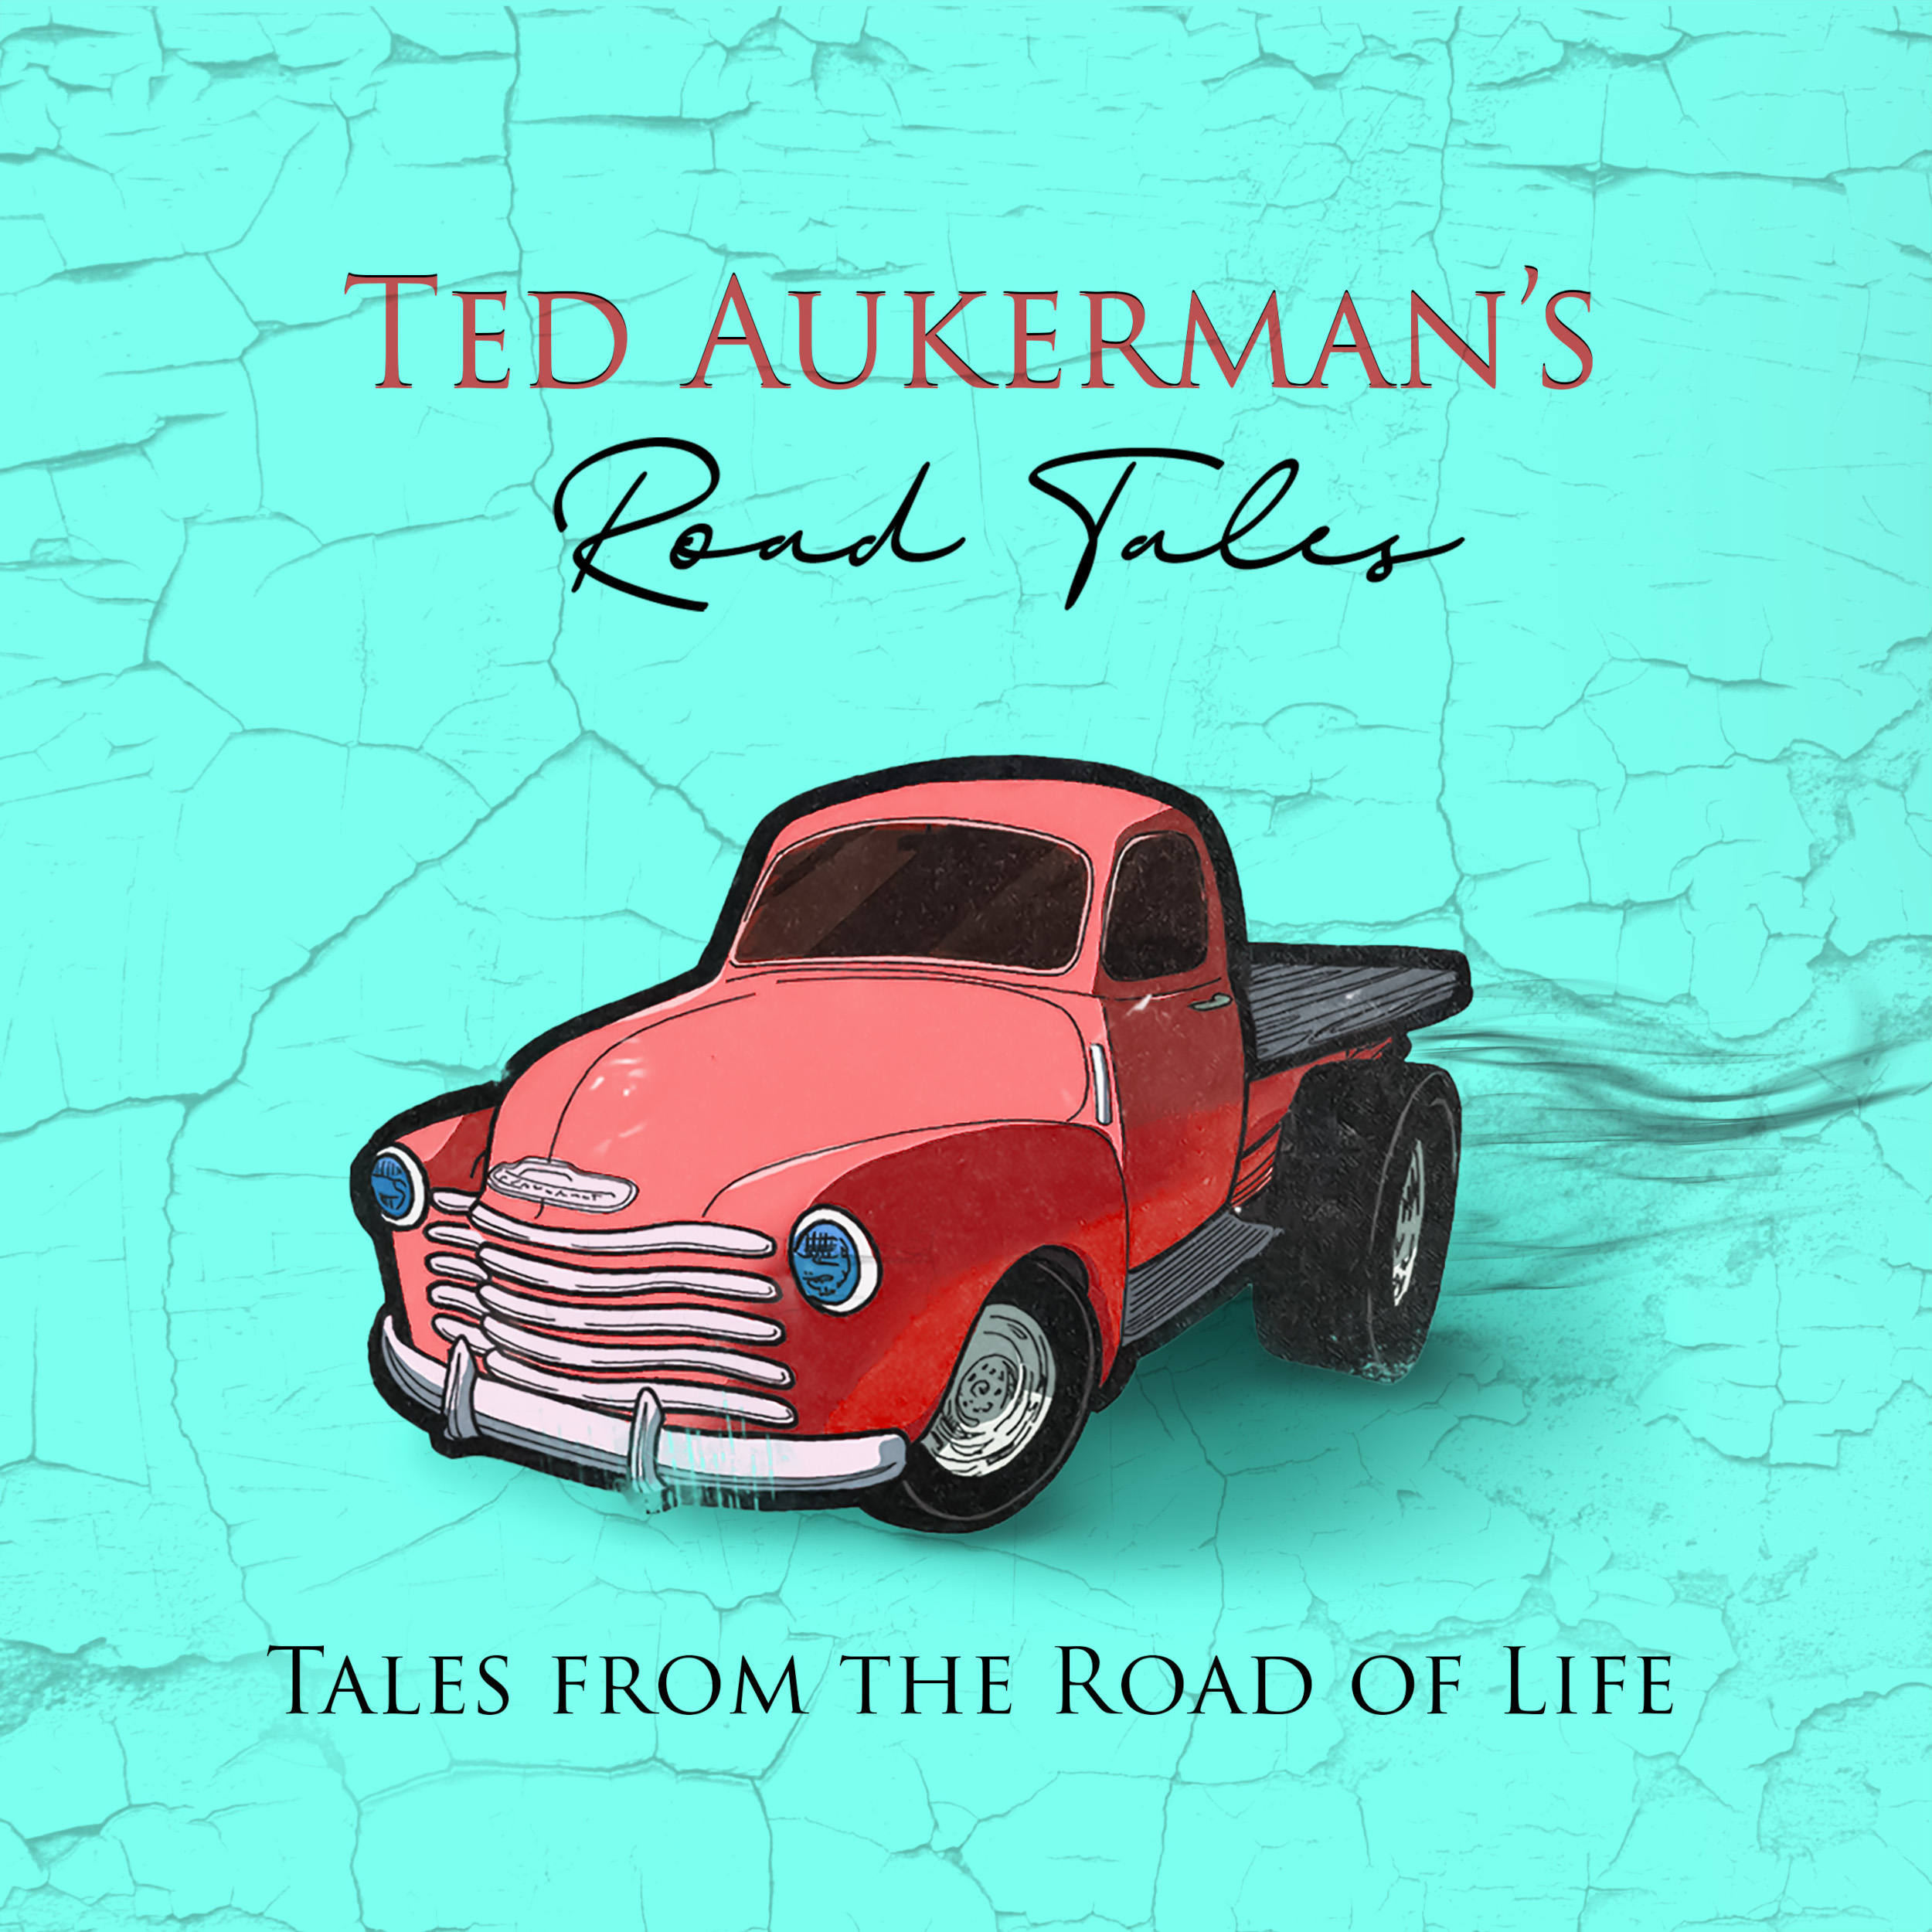 Ted Aukerman’s Road Tales- Tales From The Road of Life